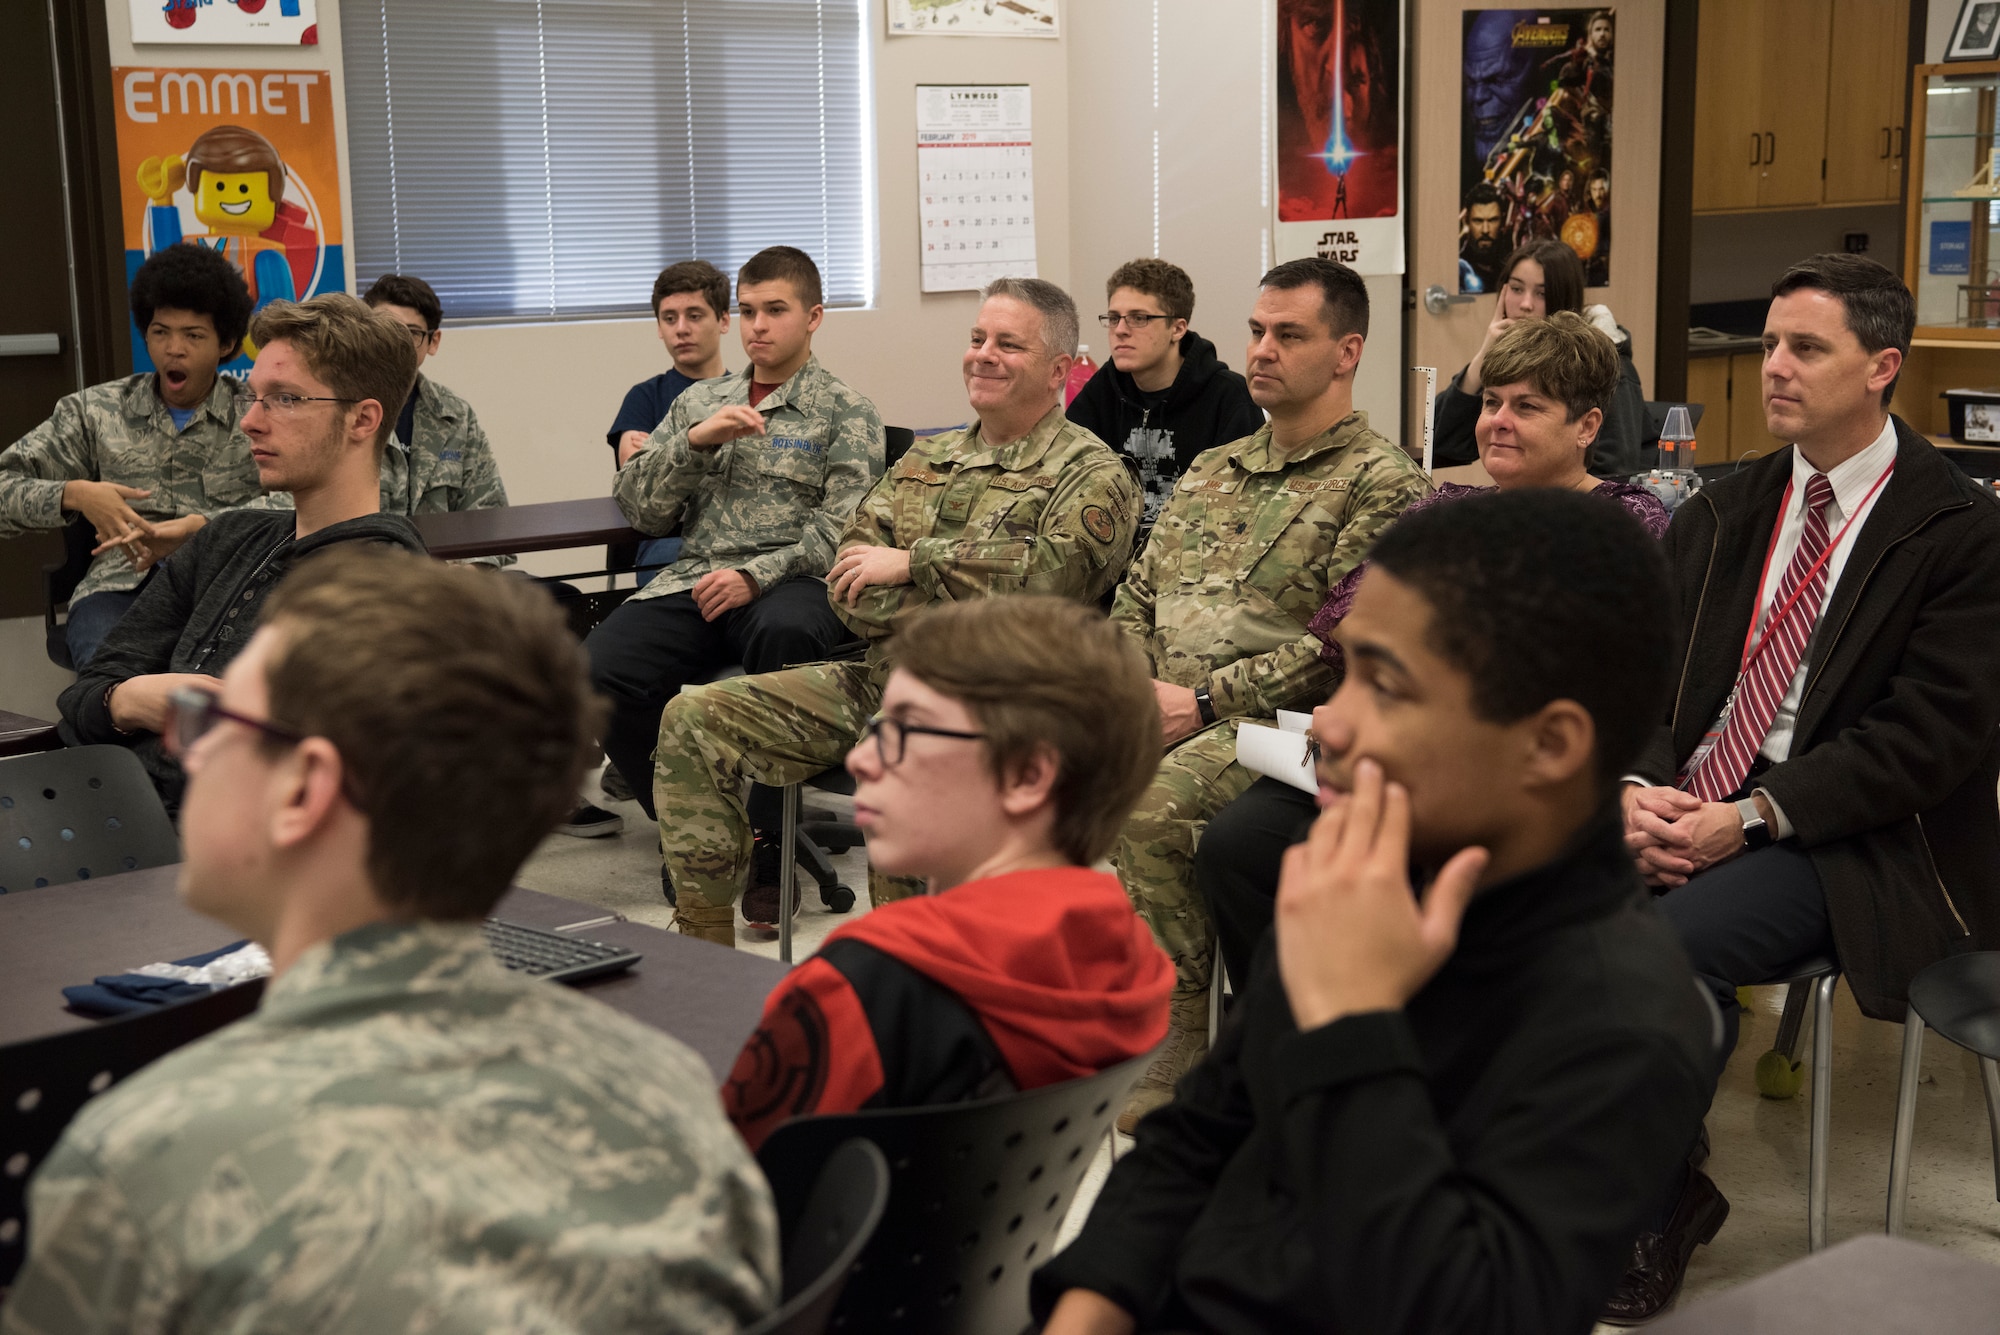 Col. Robert W. Trayers Jr., Air Force Recruiting Service vice commander, and Lt. Col. Steven Lamb, 502nd Installation Support Group vice commander, receive a presentation Feb. 13, 2019, about the science, technology, engineering and mathematics (STEM) programs at Virginia Allred Stacey Junior/Senior High School at Joint Base San Antonio-Lackland, Texas.